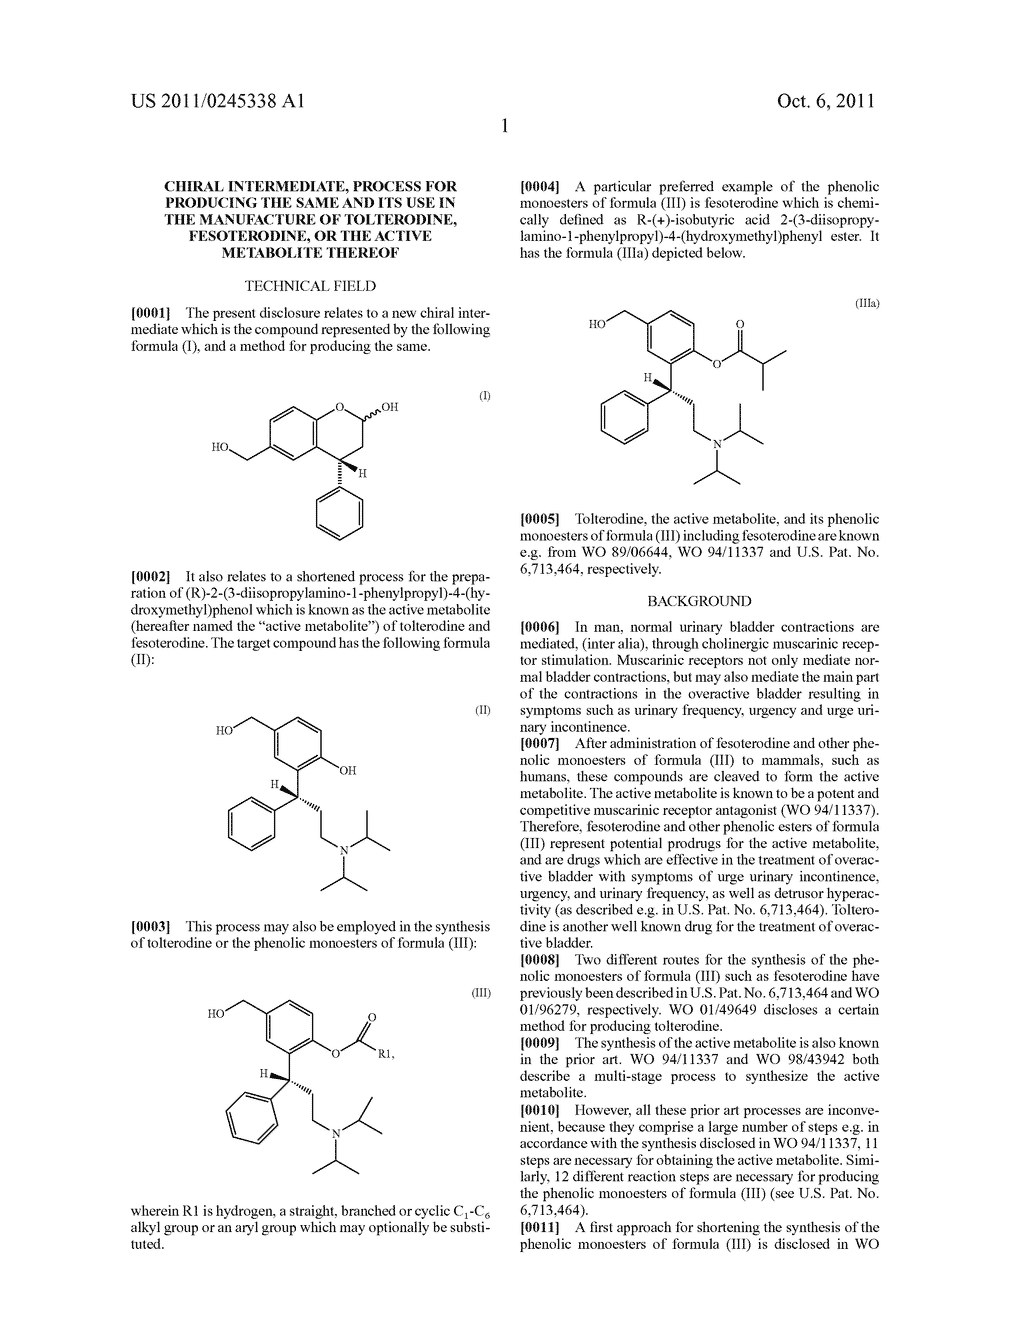 CHIRAL INTERMEDIATE, PROCESS FOR PRODUCING THE SAME AND ITS USE IN THE     MANUFACTURE OF TOLTERODINE, FESOTERODINE, OR THE ACTIVE METABOLITE     THEREOF - diagram, schematic, and image 02